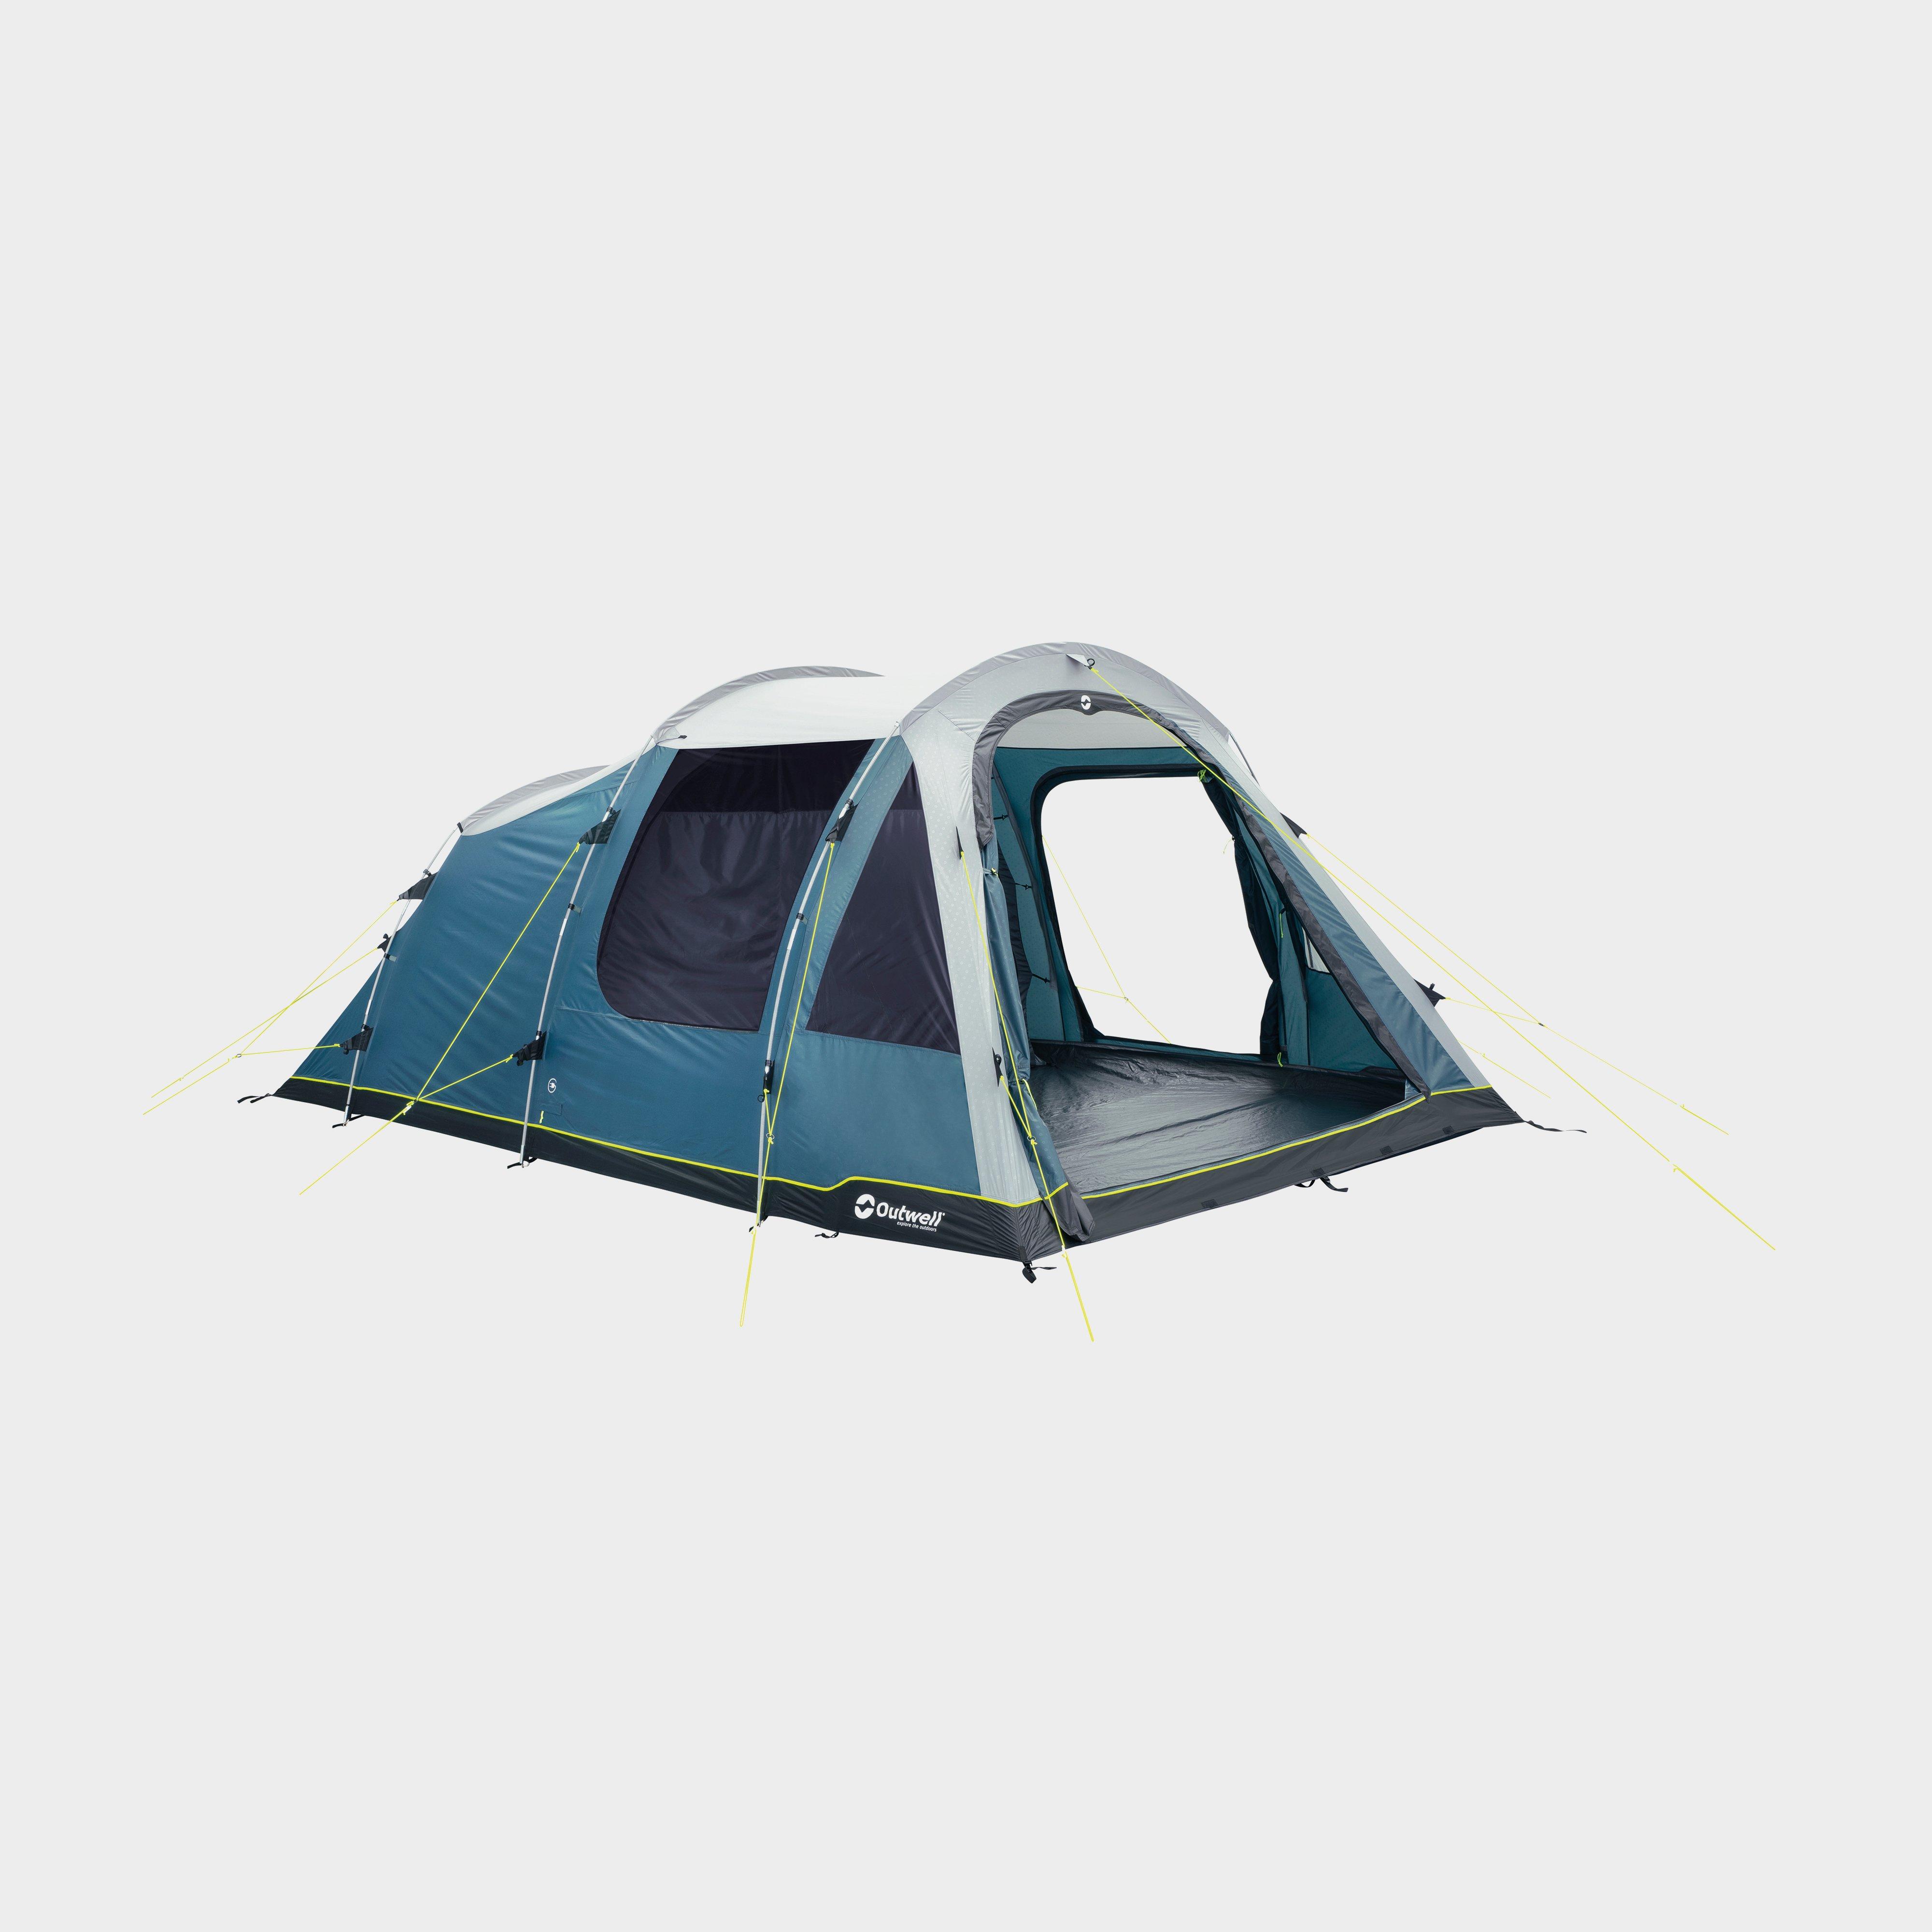 Outwell Glendo 6A Inflatable Family Tent Review